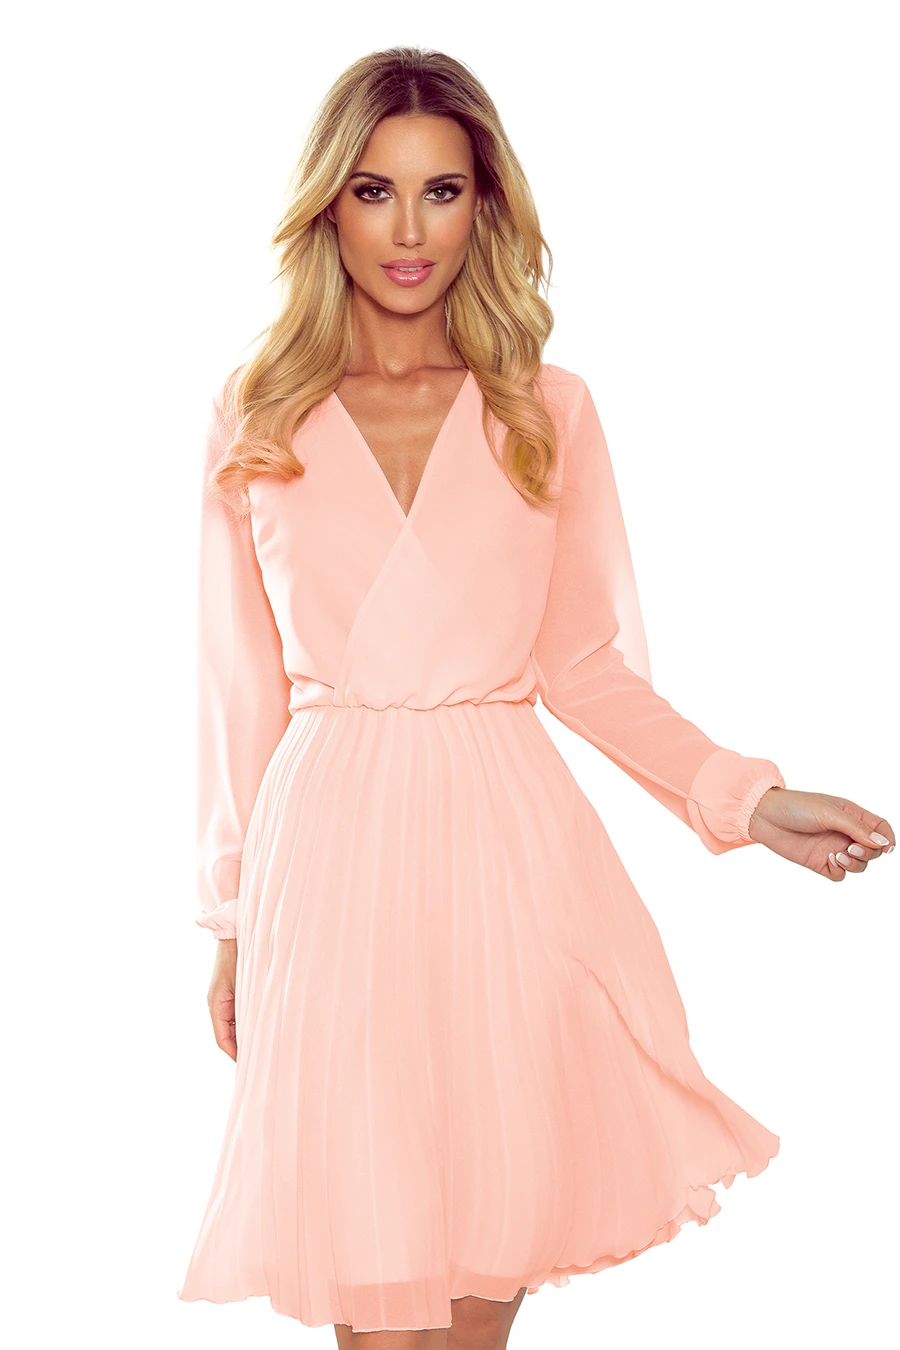 313-2 ISABELLE Pleated dress with neckline and long sleeve - peach color